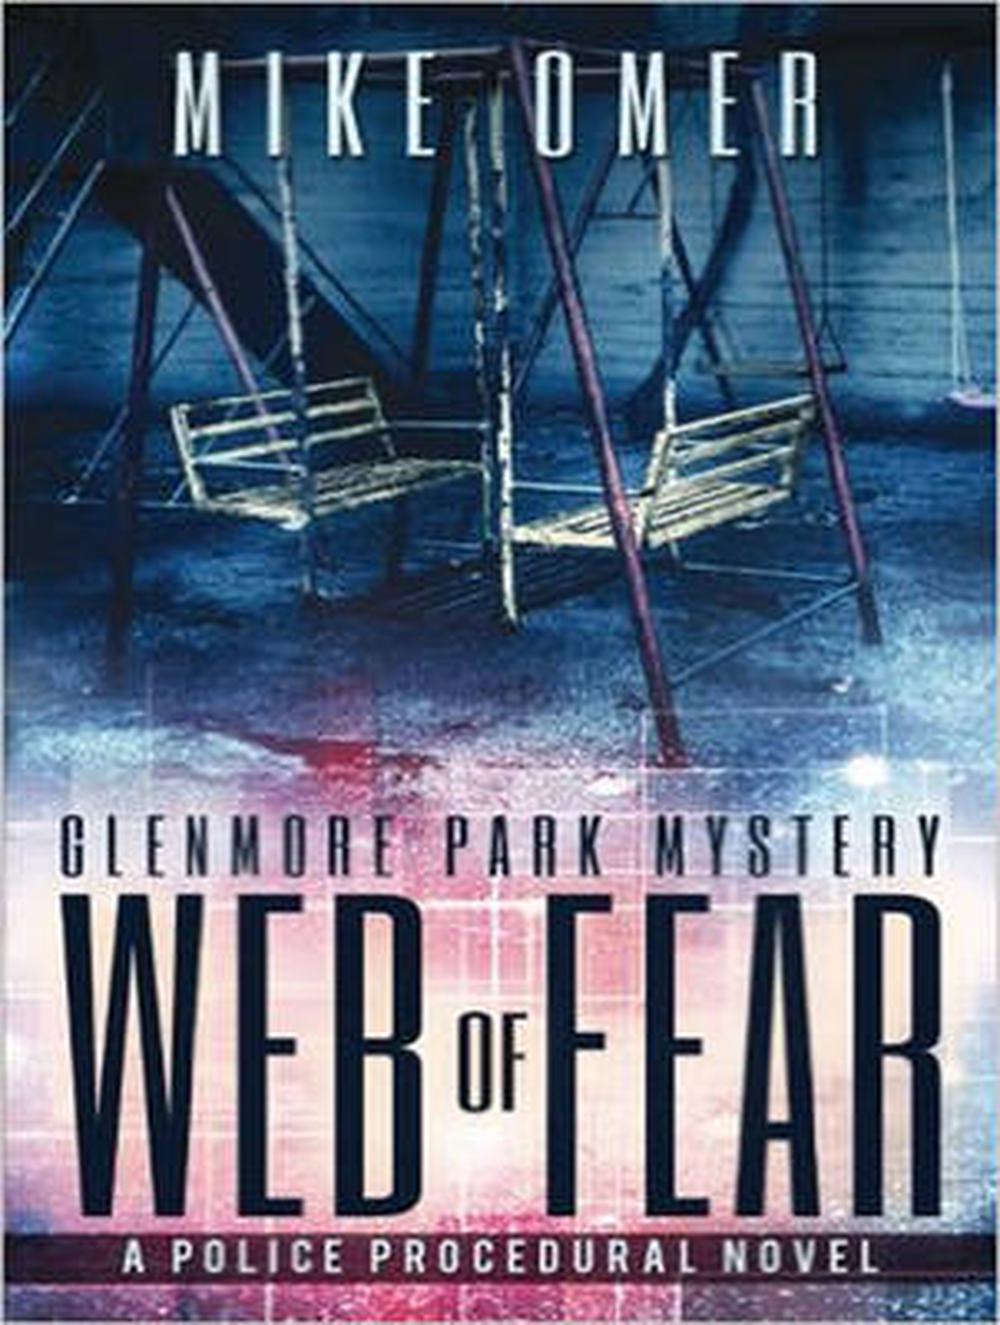 web of fear a police procedural novel mike omer